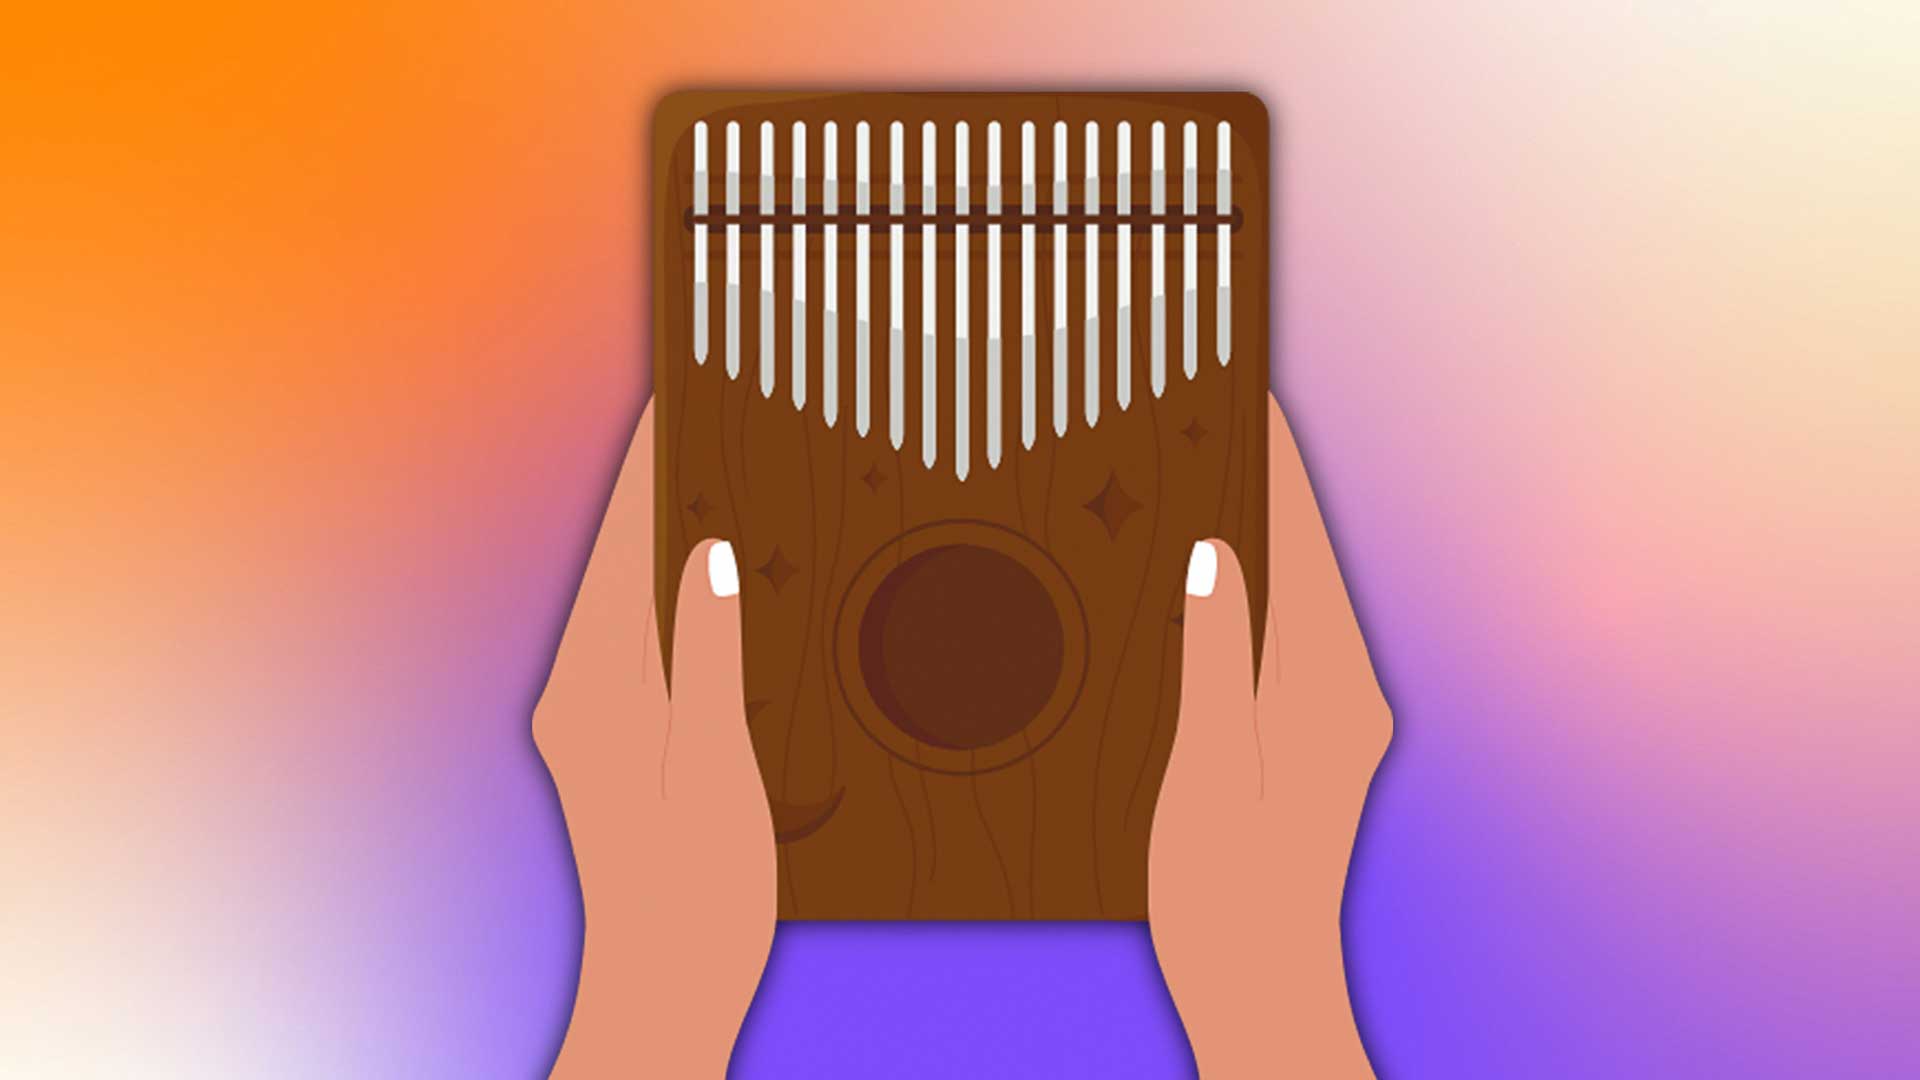 50+ Easy Kalimba Songs For Beginners (With Tabs)